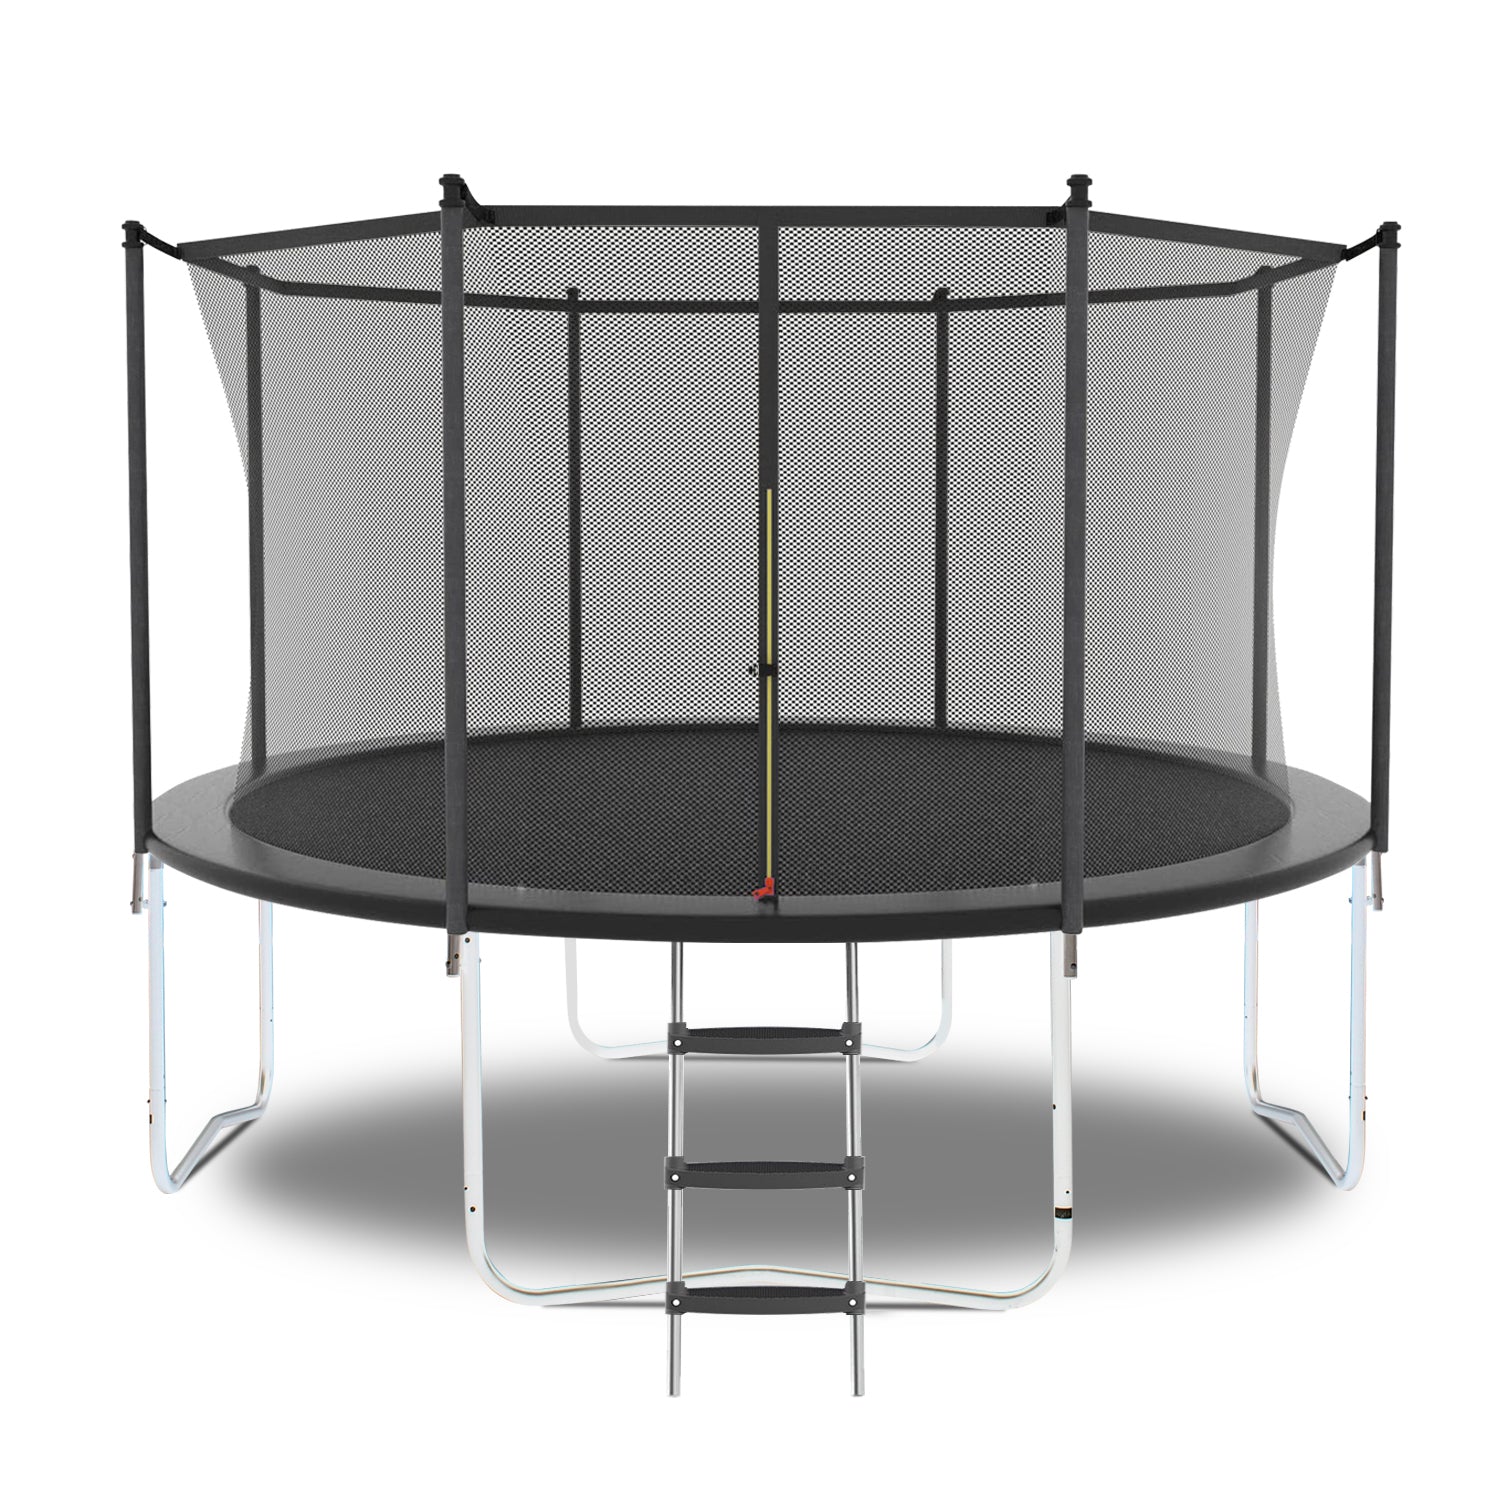 14FT Trampoline with Safety Enclosure Net, Outdoor gray-pvc-iron